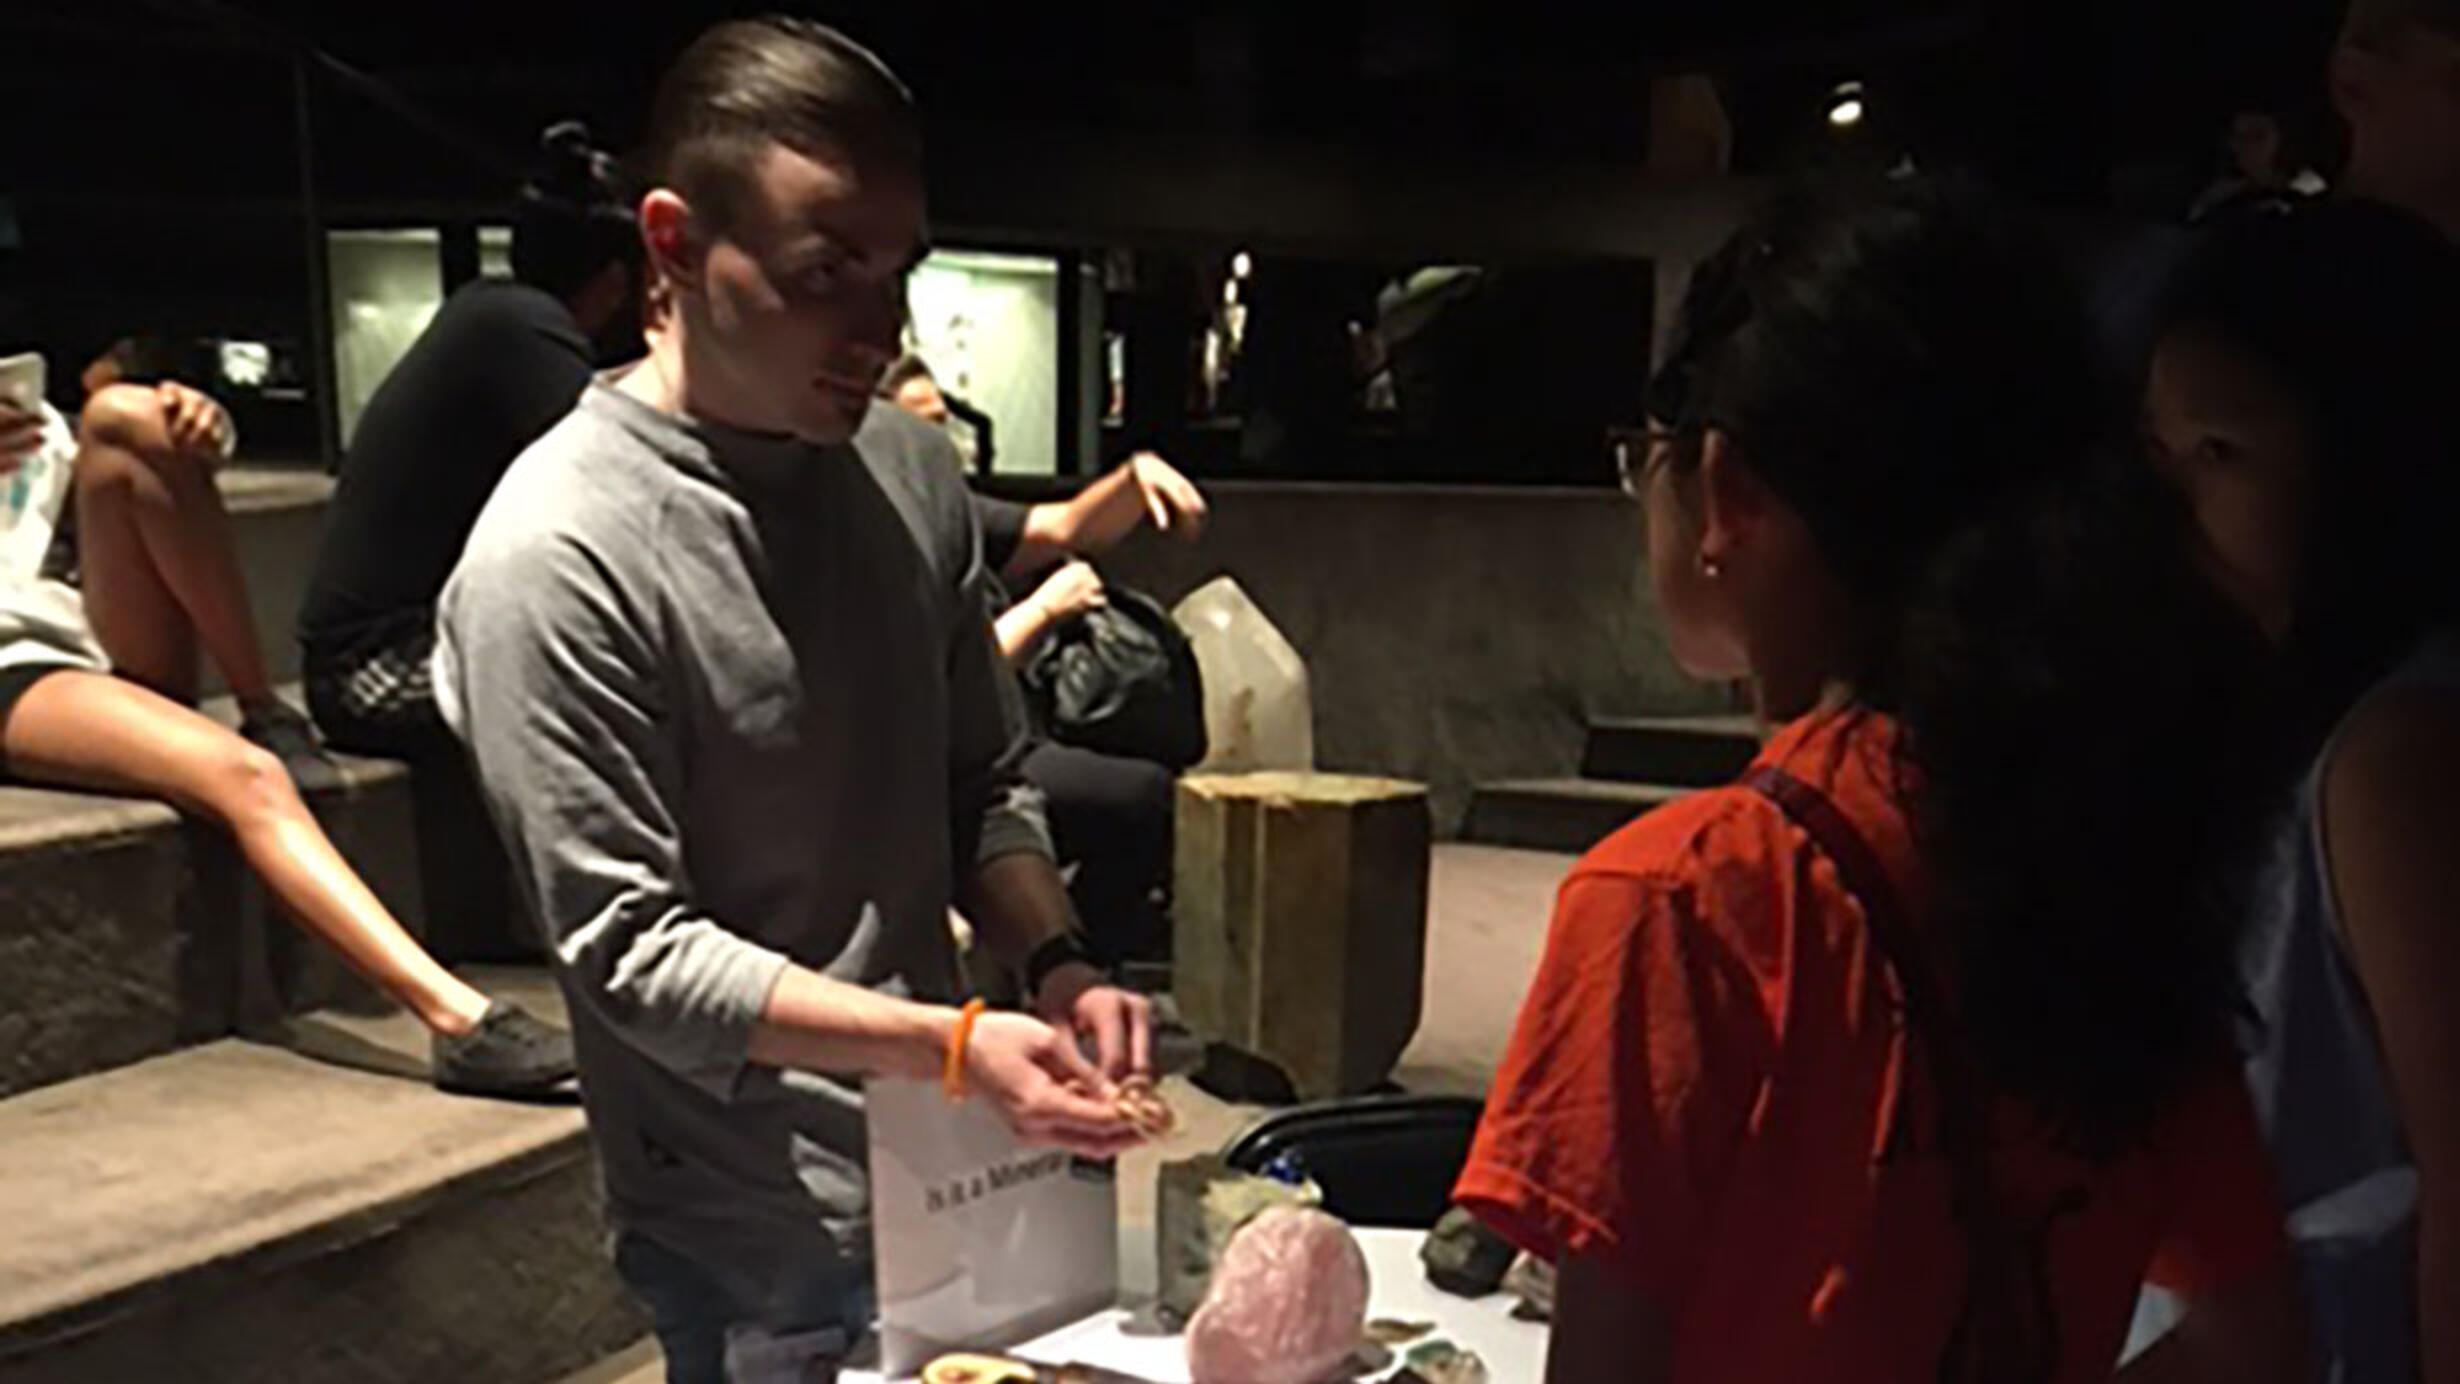 Instructor with student at Mineral display table in the Museum's Hall of Gems and Minerals.